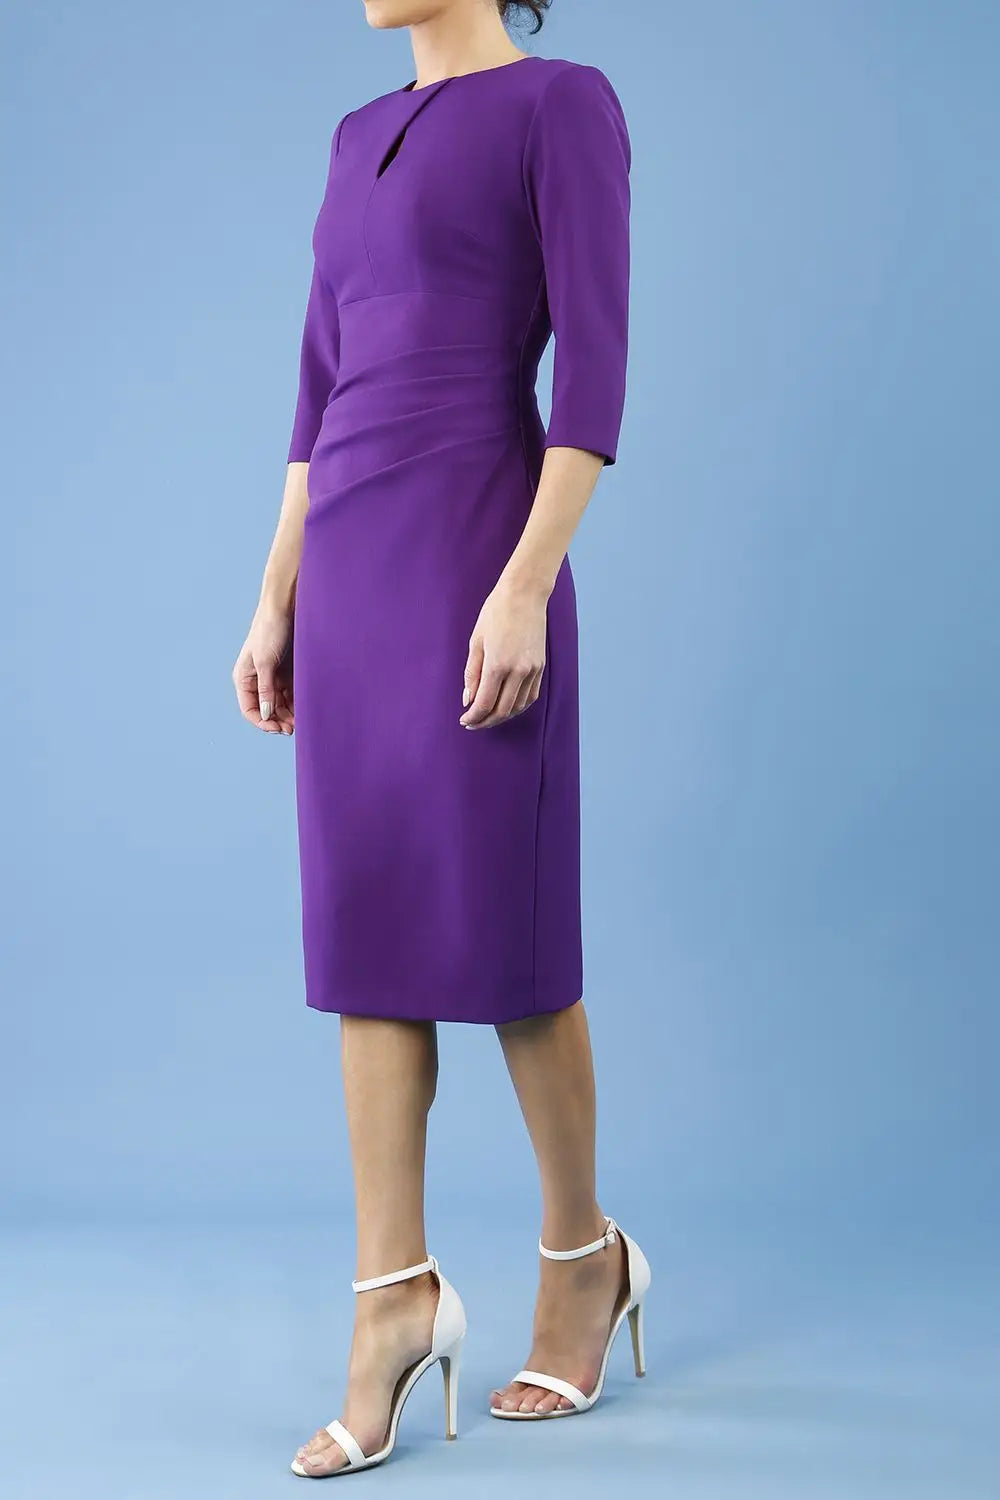 Women' Business Ubrique Dress - Deep Purple NORA GARDNER | OFFICIAL STORE for work and office